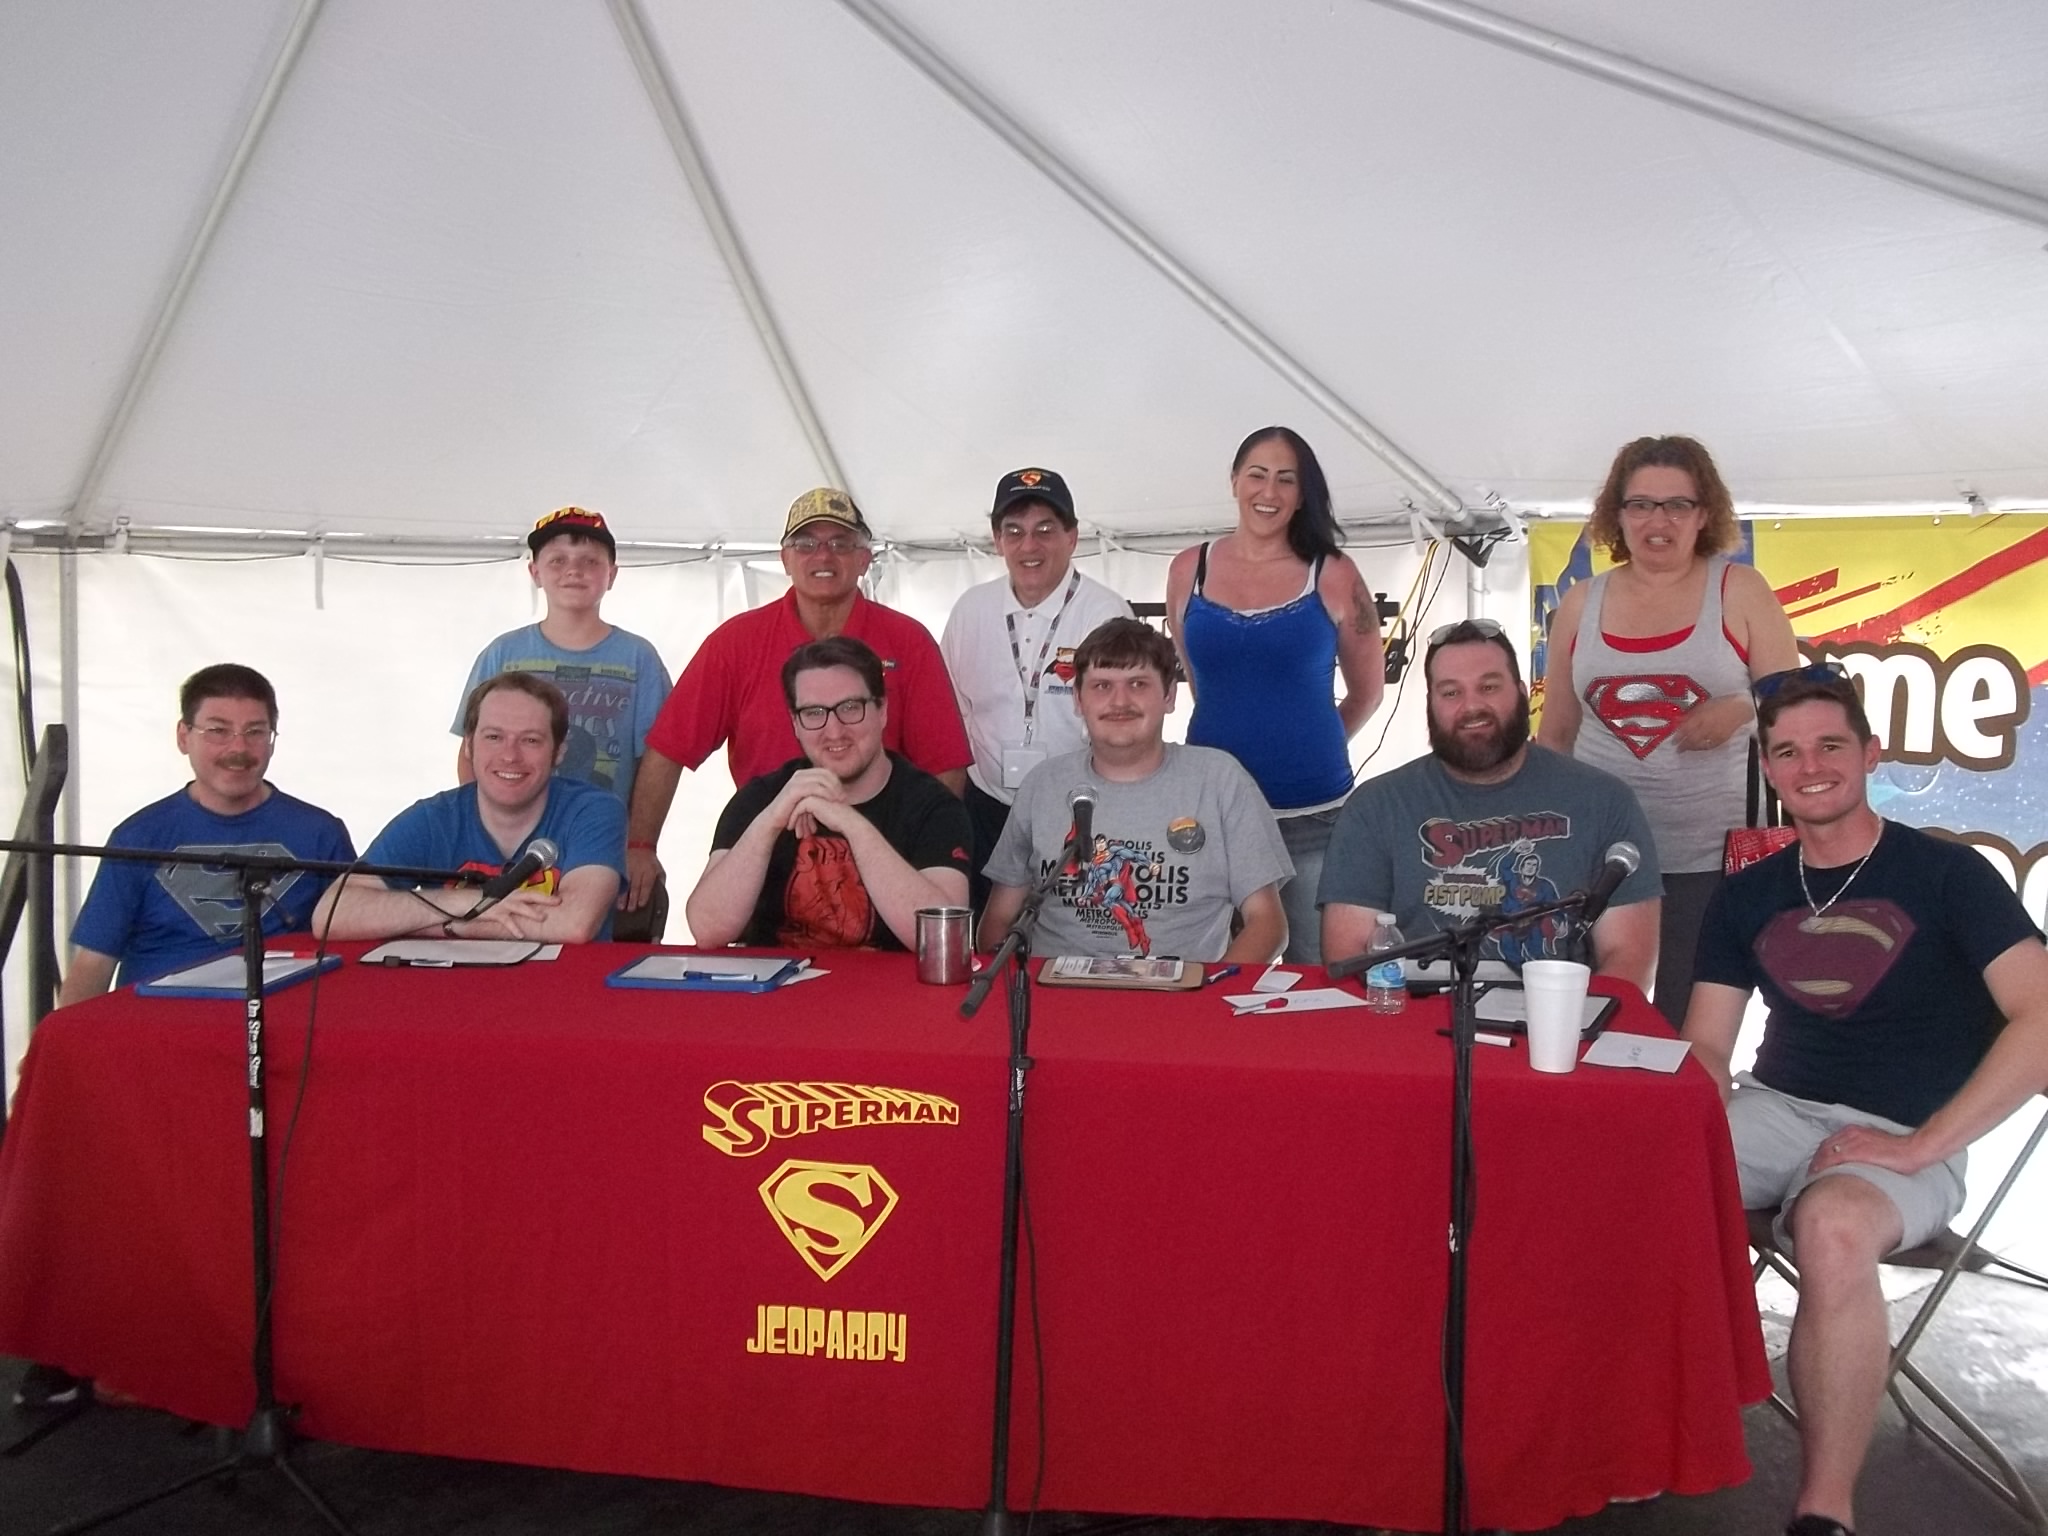 2016 Superman Jeopardy contestants and staff 